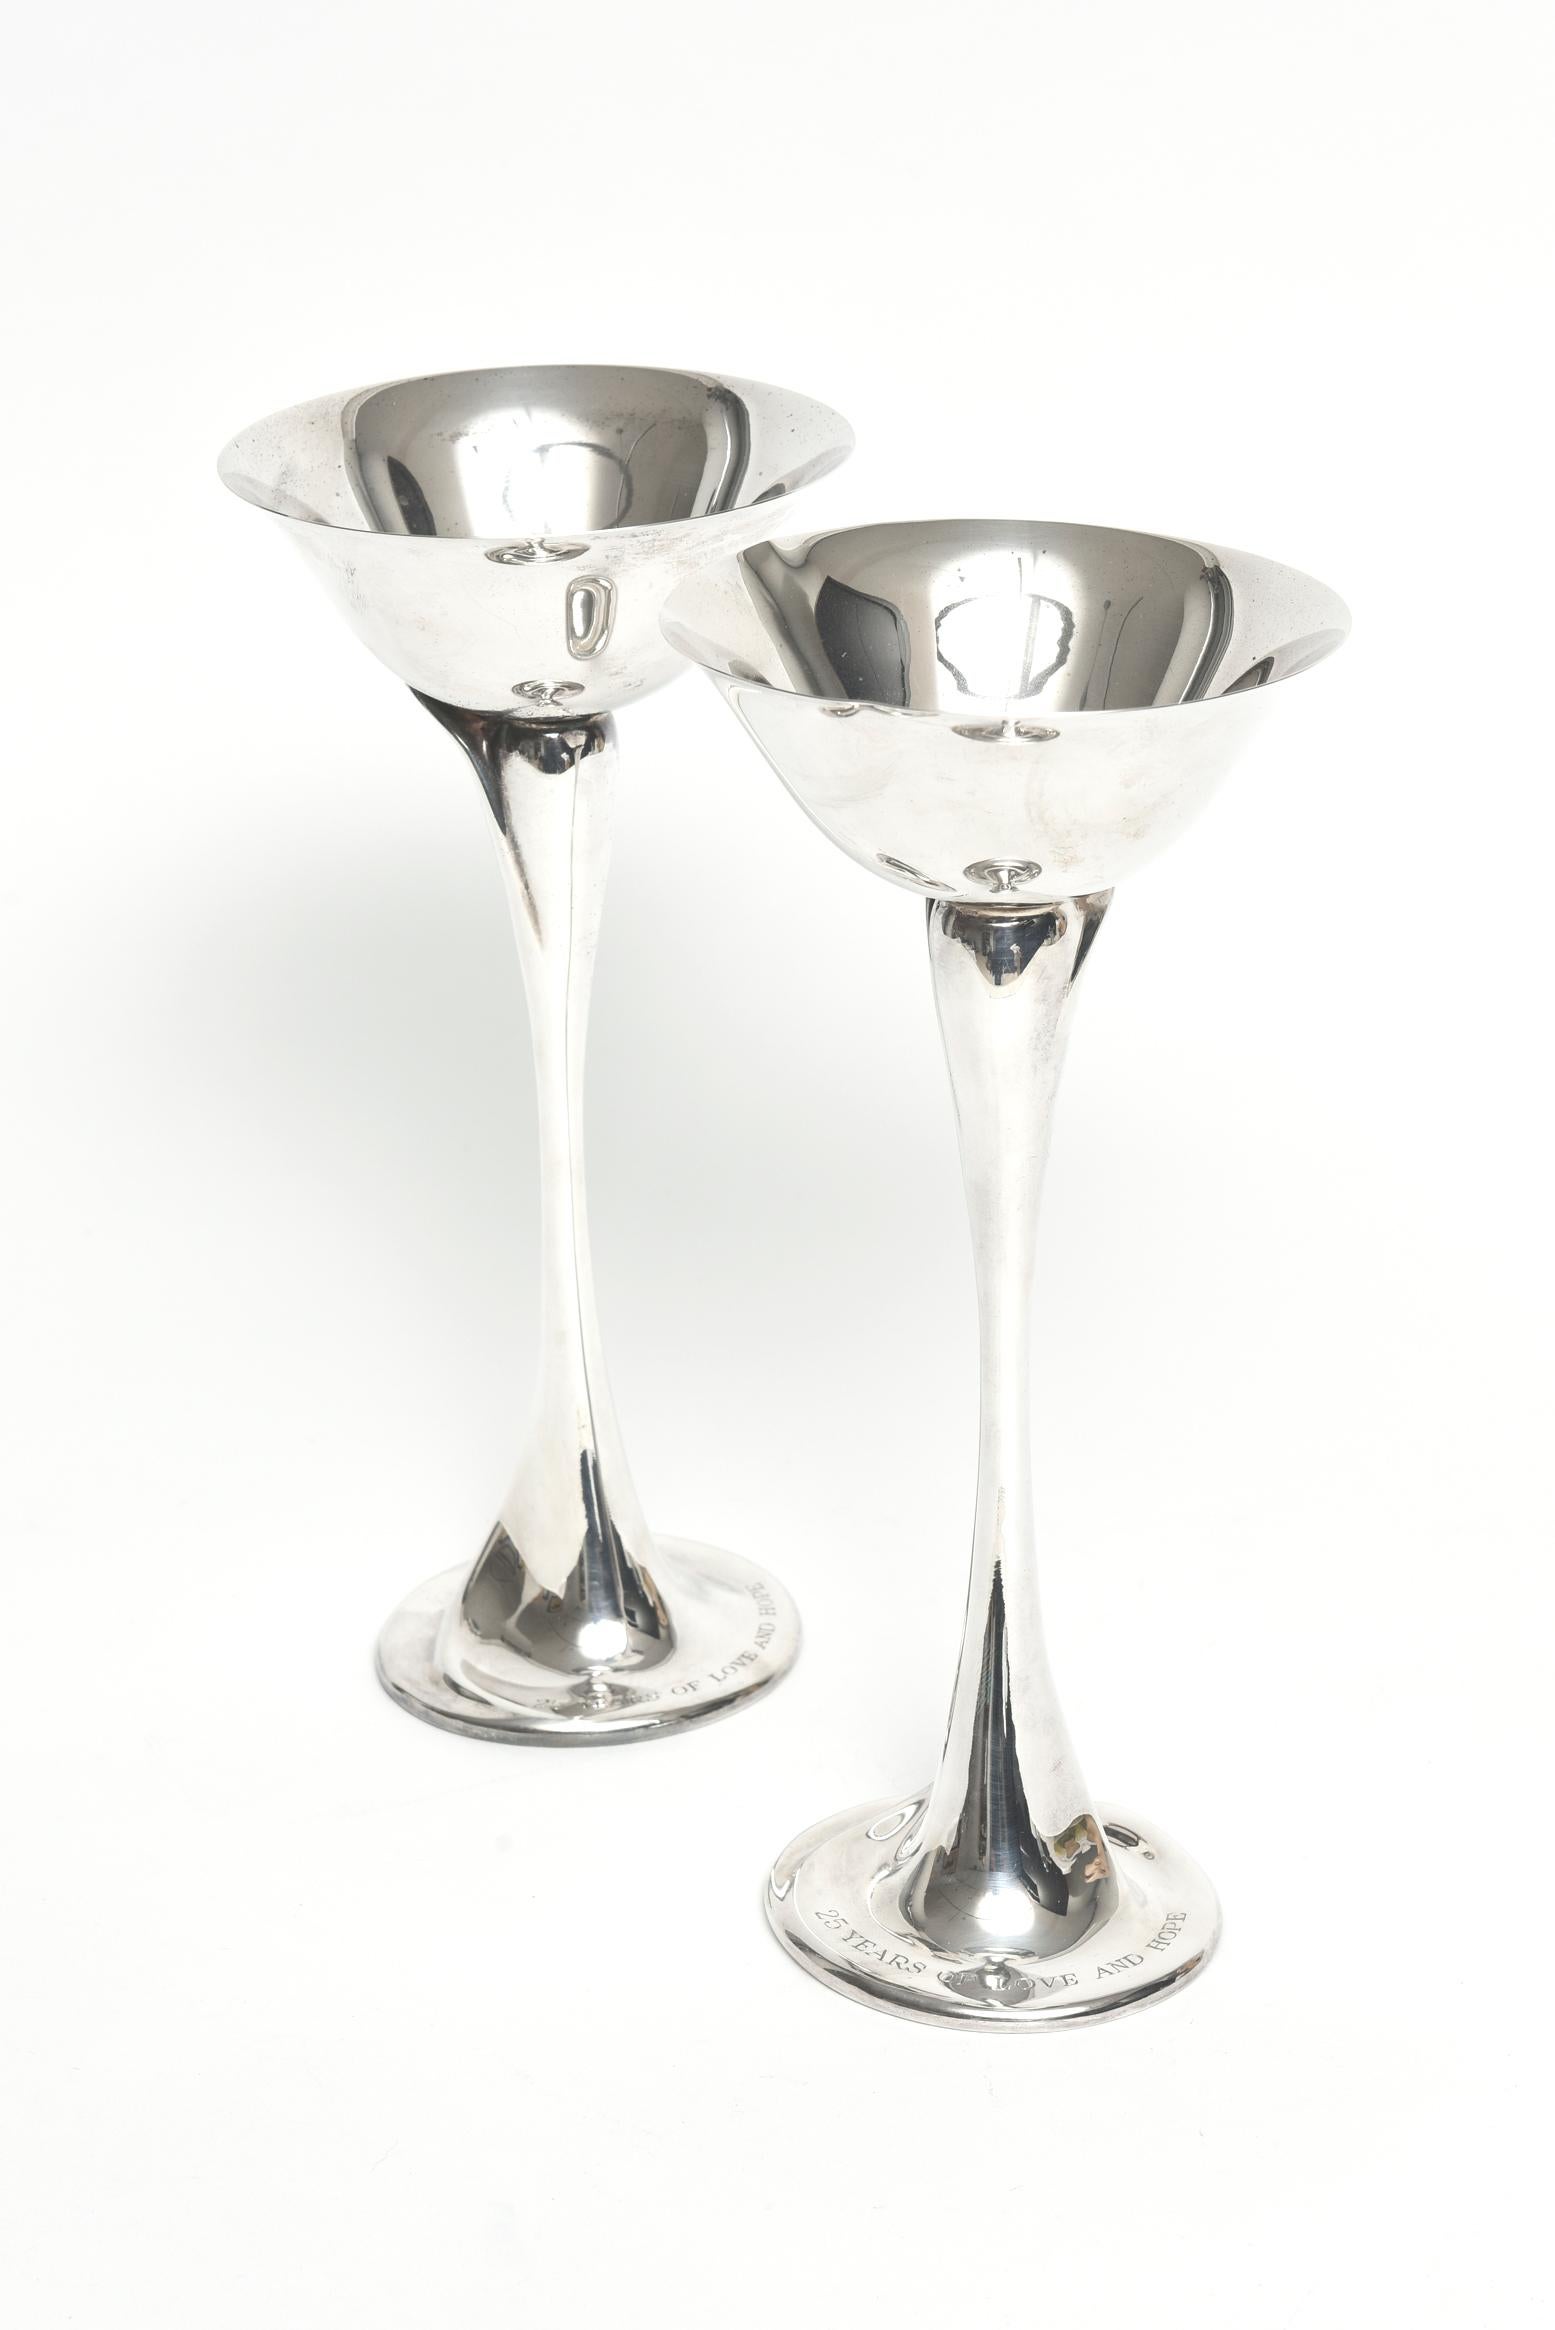 Elsa Peretti champagne glass. Sterling silver, 5-ounce bowl. Original designs copyrighted by Elsa Peretti. The retail on Tiffany's site is $1,250 per cup. These are a contemporary flower form design, each with an inverted bell-form bowl and shaped